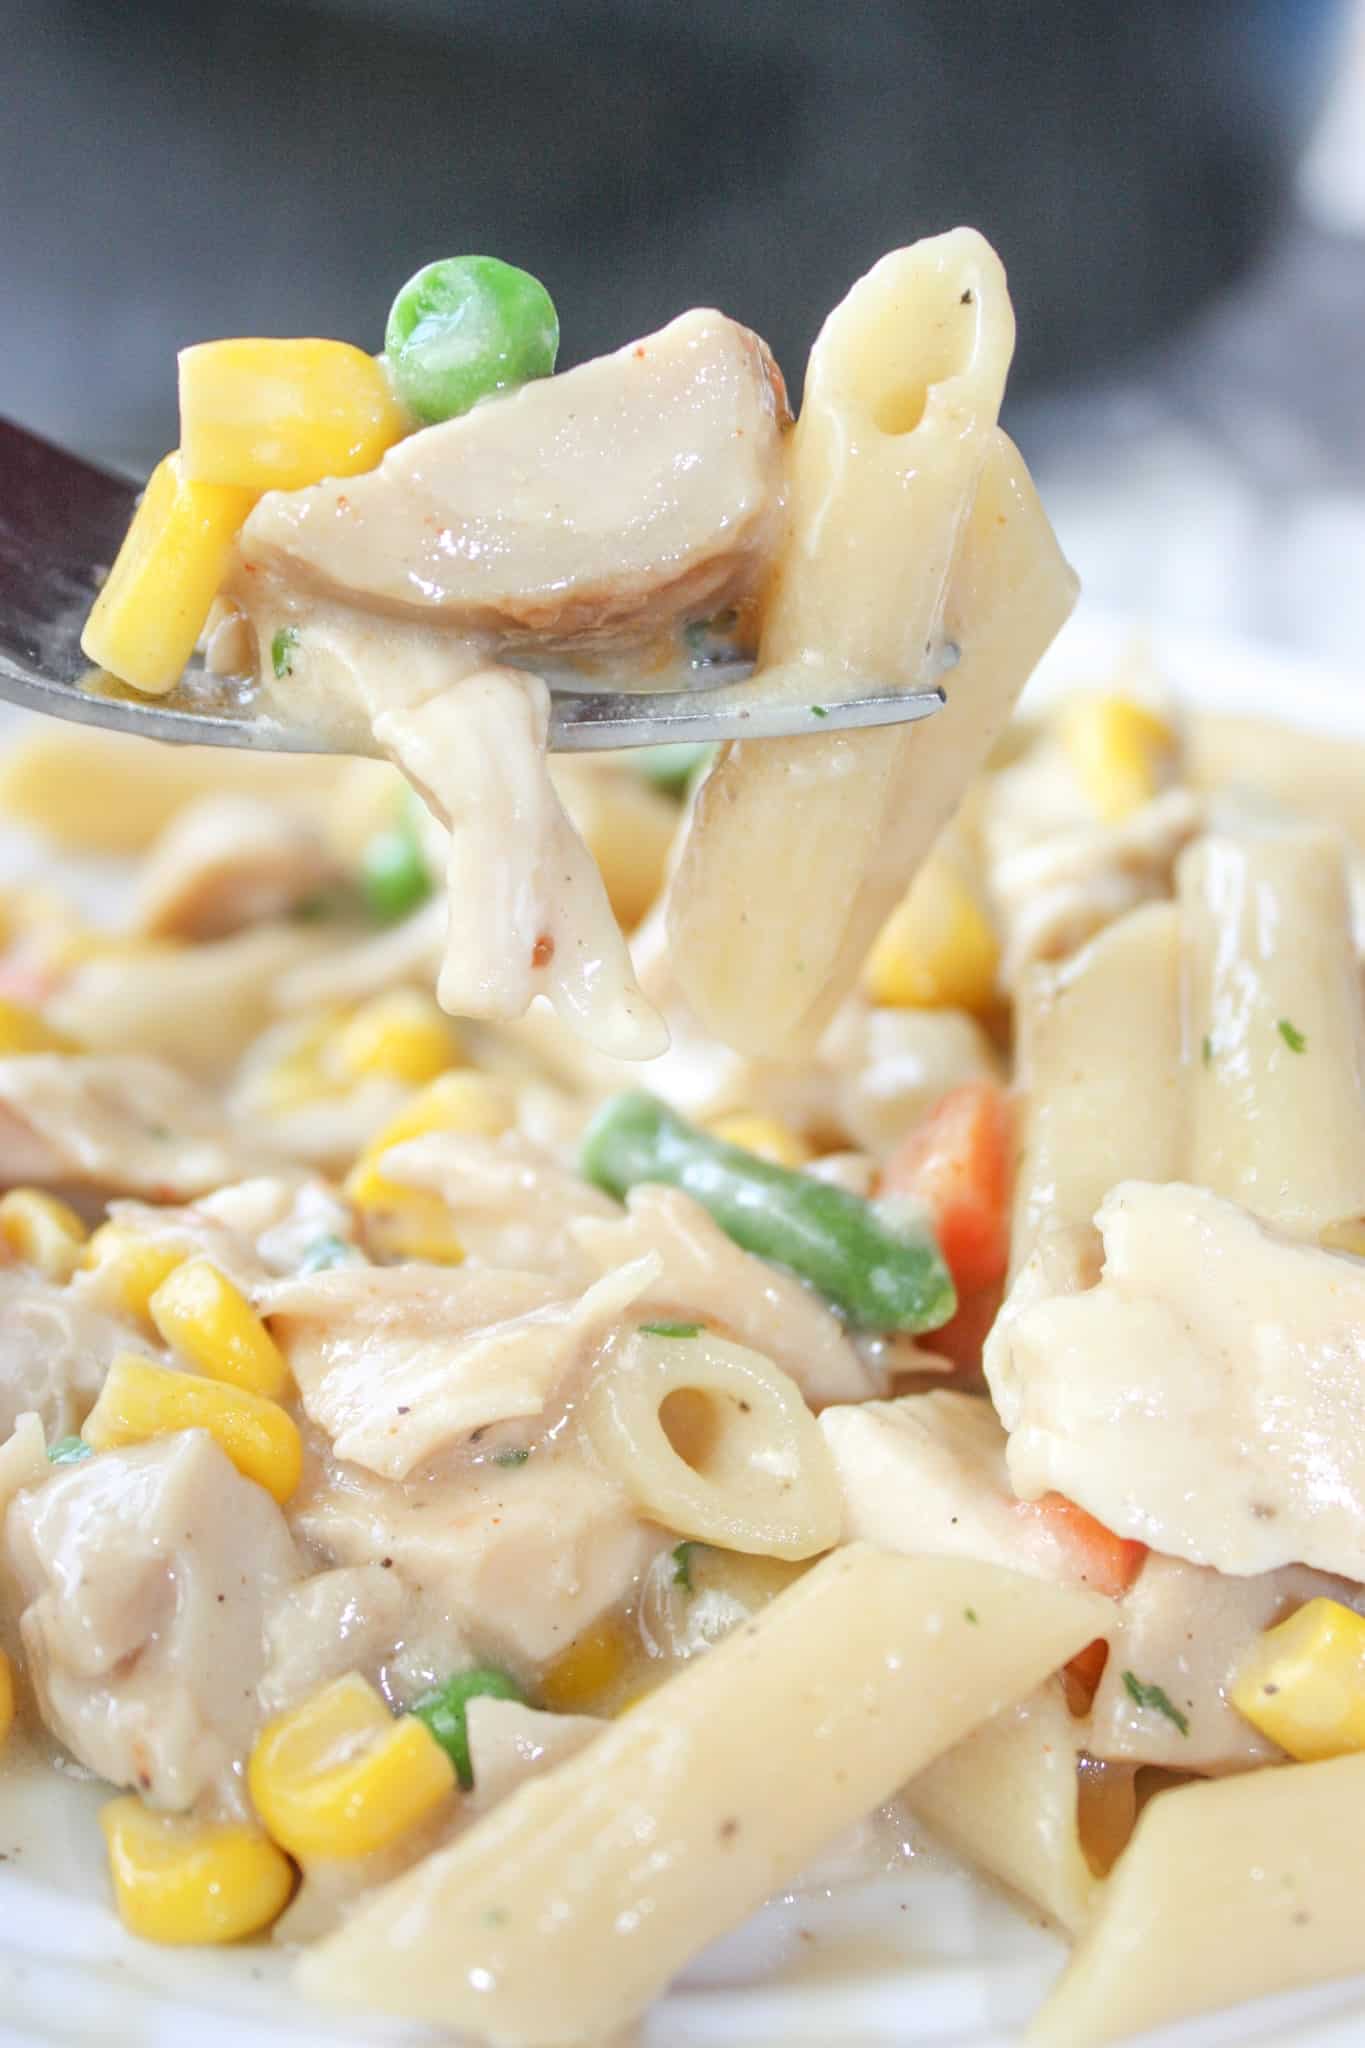 Creamy Stove Top Chicken and Pasta is a comfort recipe that is quick and easy to make.  This gluten free skillet dinner is sure to hit the spot any night of the week.